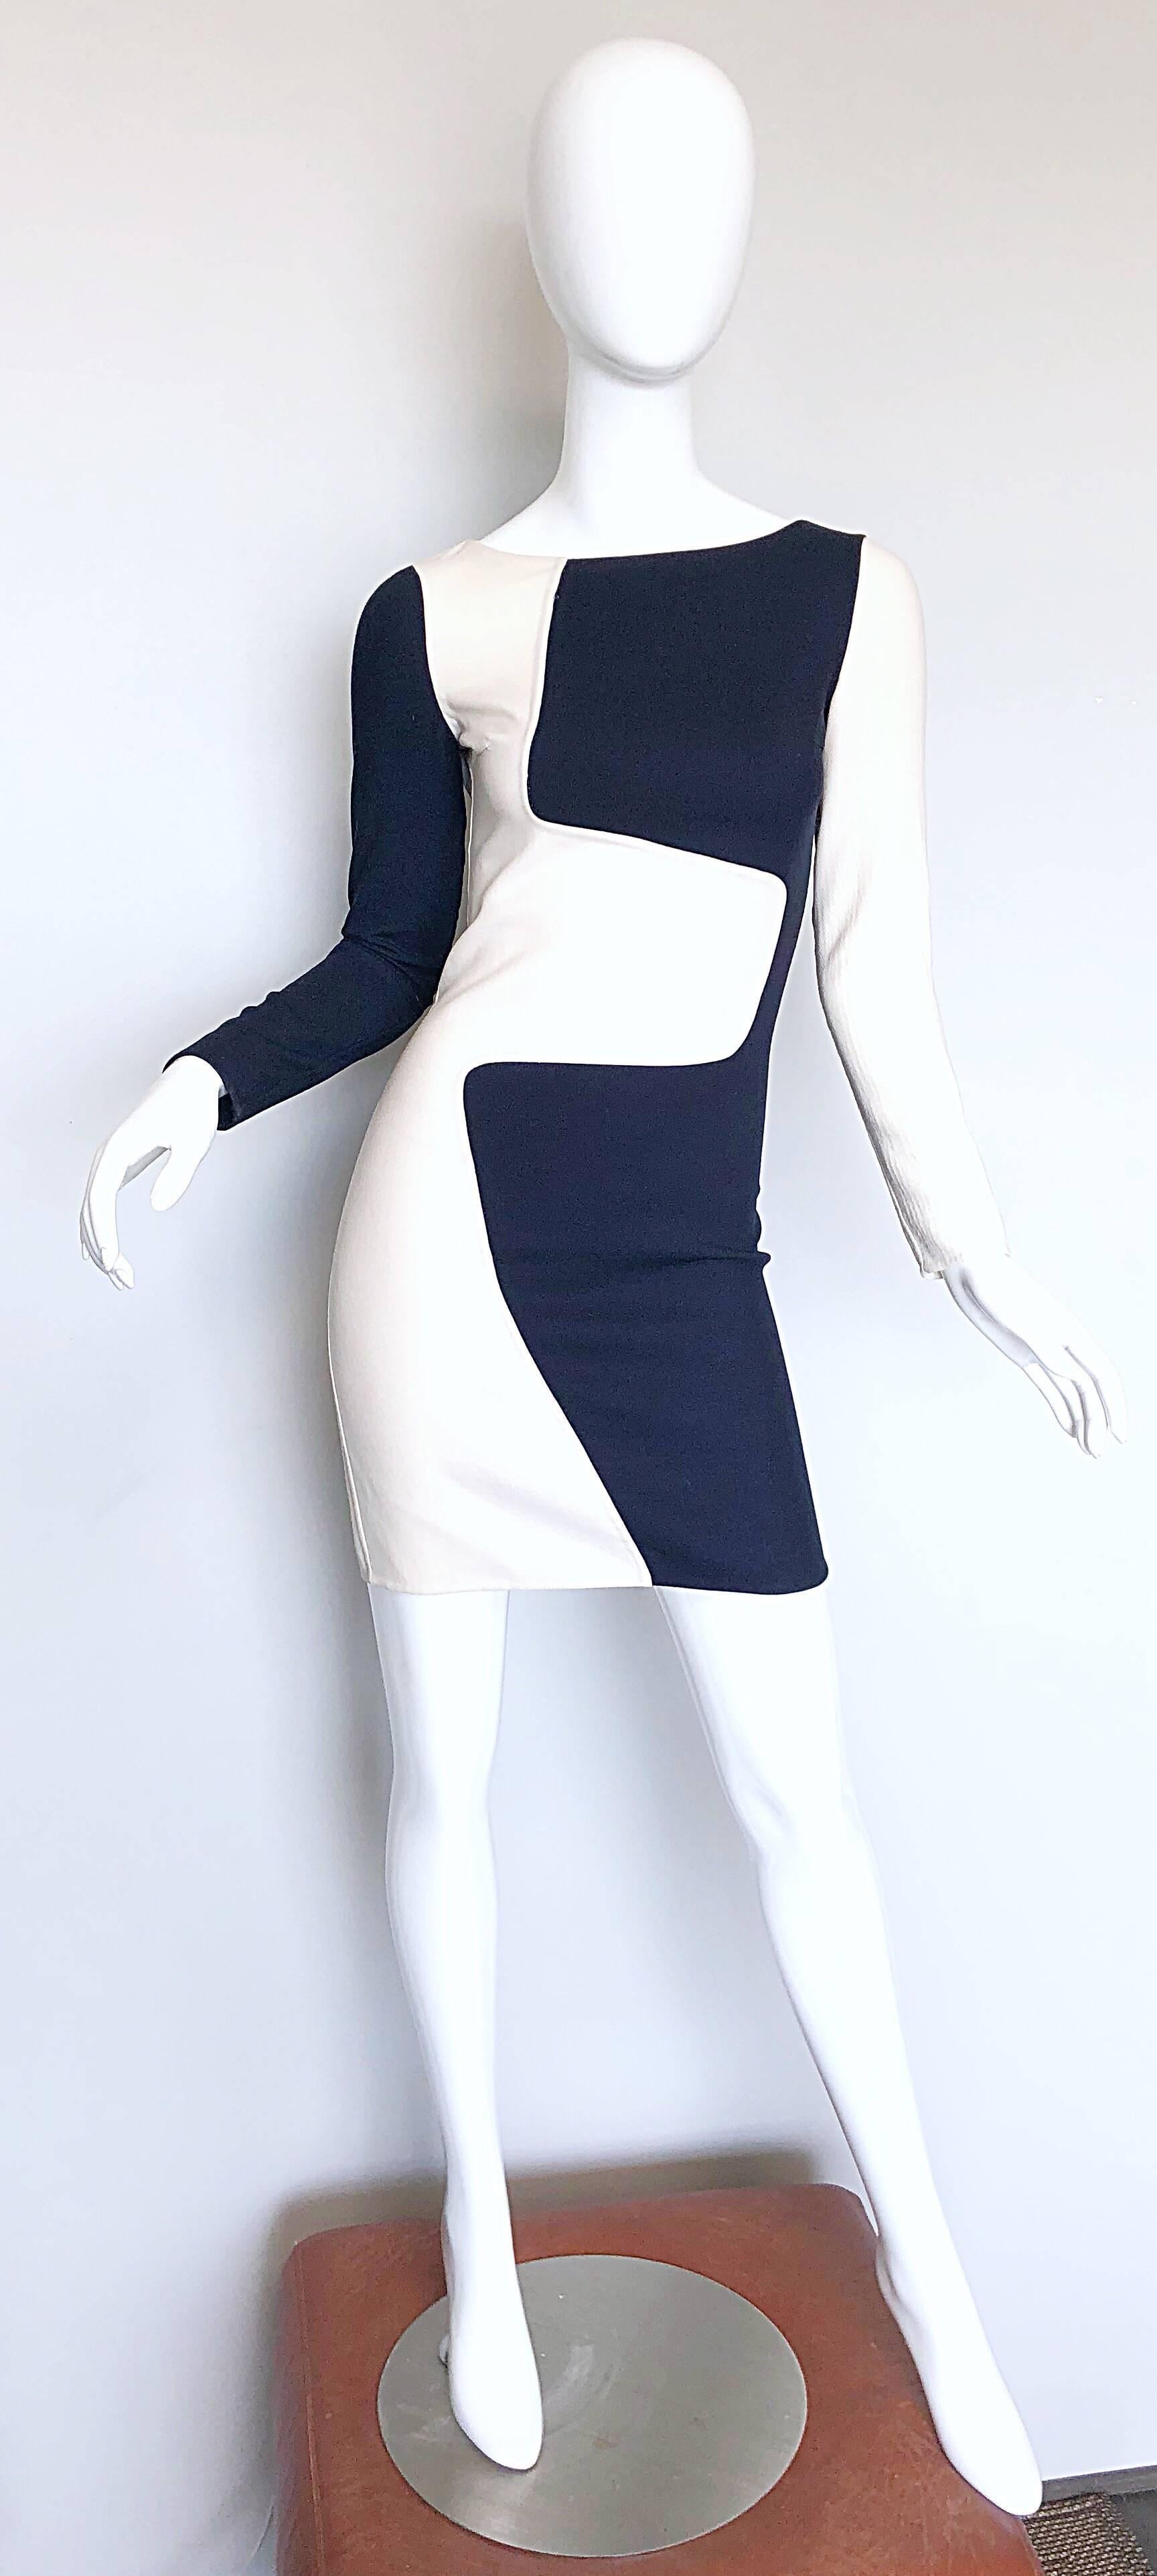 Flattering MICHAEL KORS COLLECTION Spring / Summer 2013 navy blue and white color block ' puzzle ' 1960s / 60s style runway dress! Signature double faced virgin wool stretches to fit. Any MK fan knows that the designer really knows how to accentuate